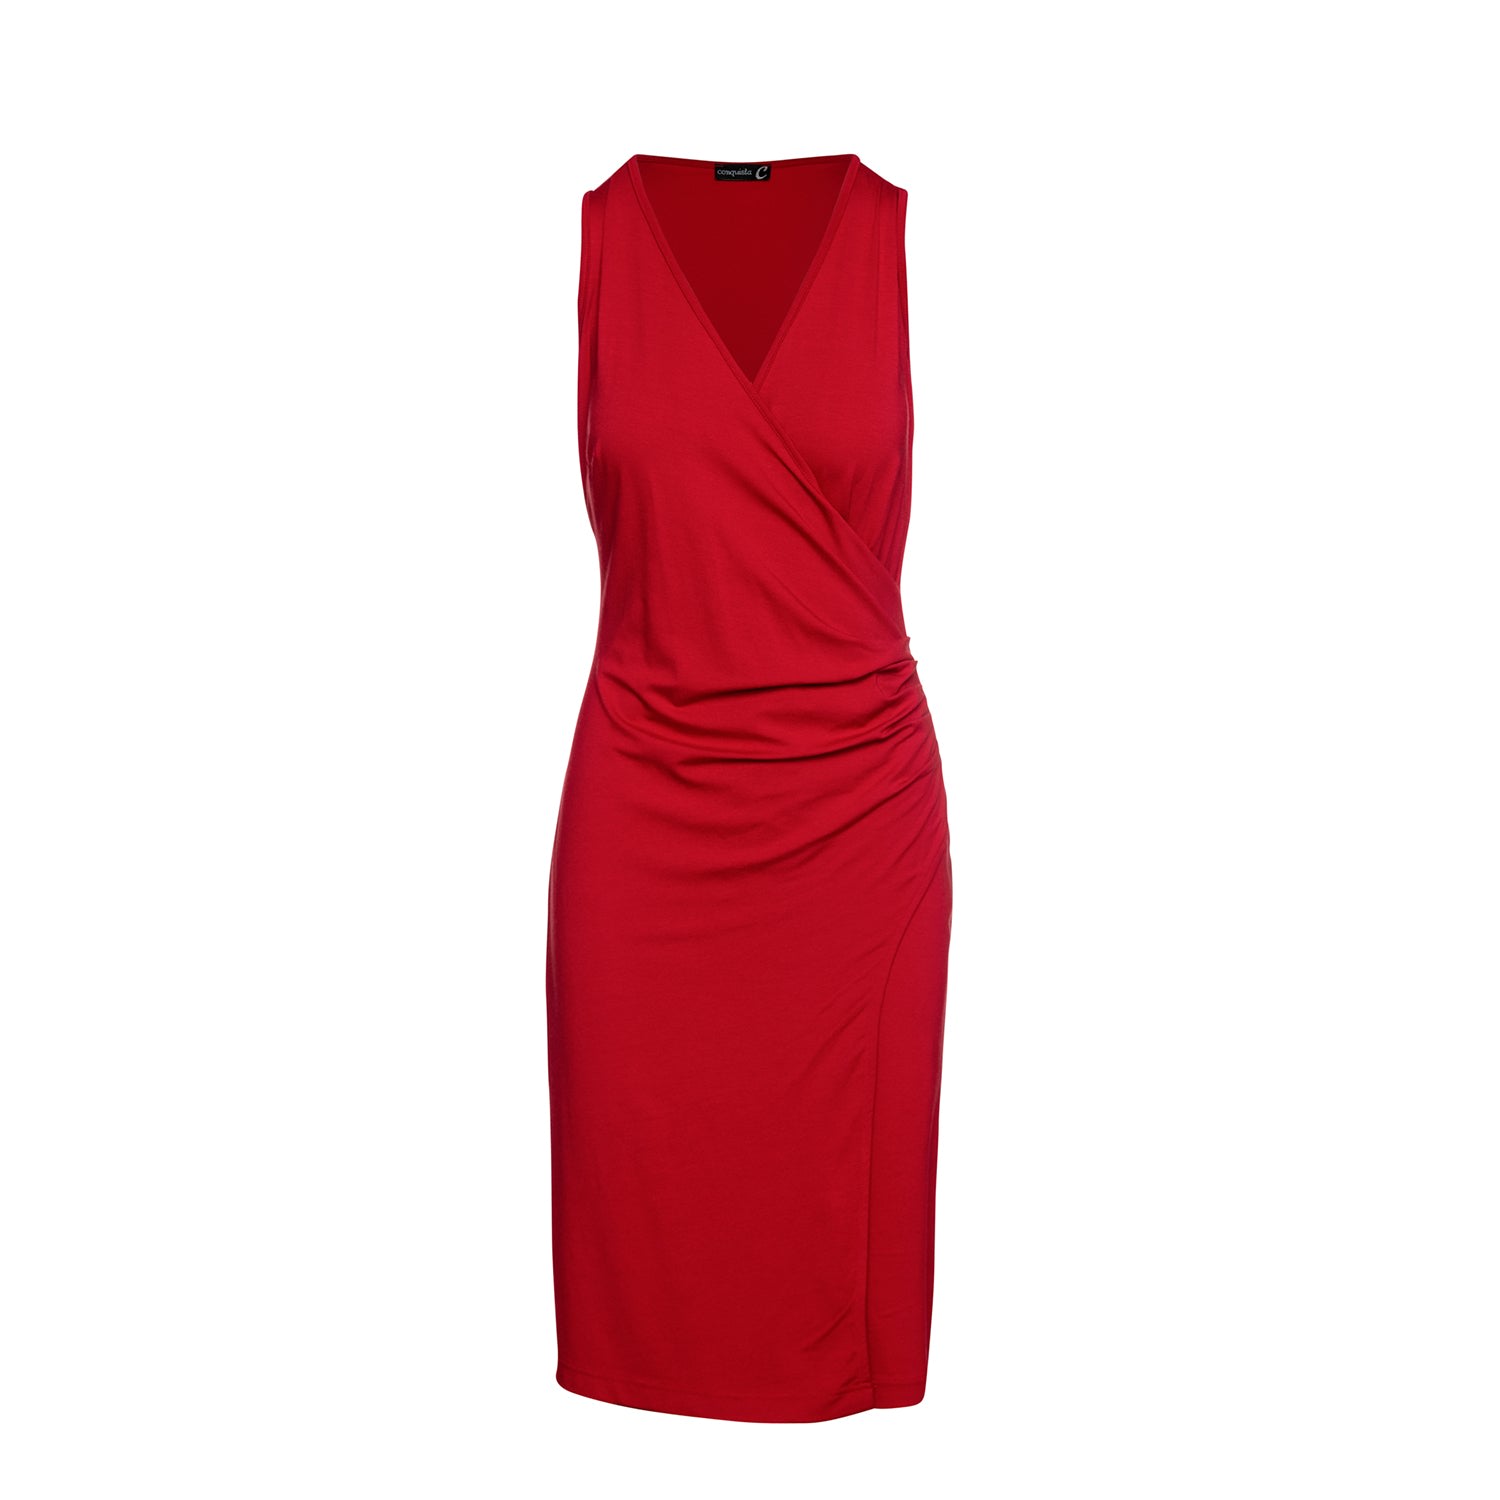 Women’s Wrap Style Sleeveless Dress In Red Large Conquista